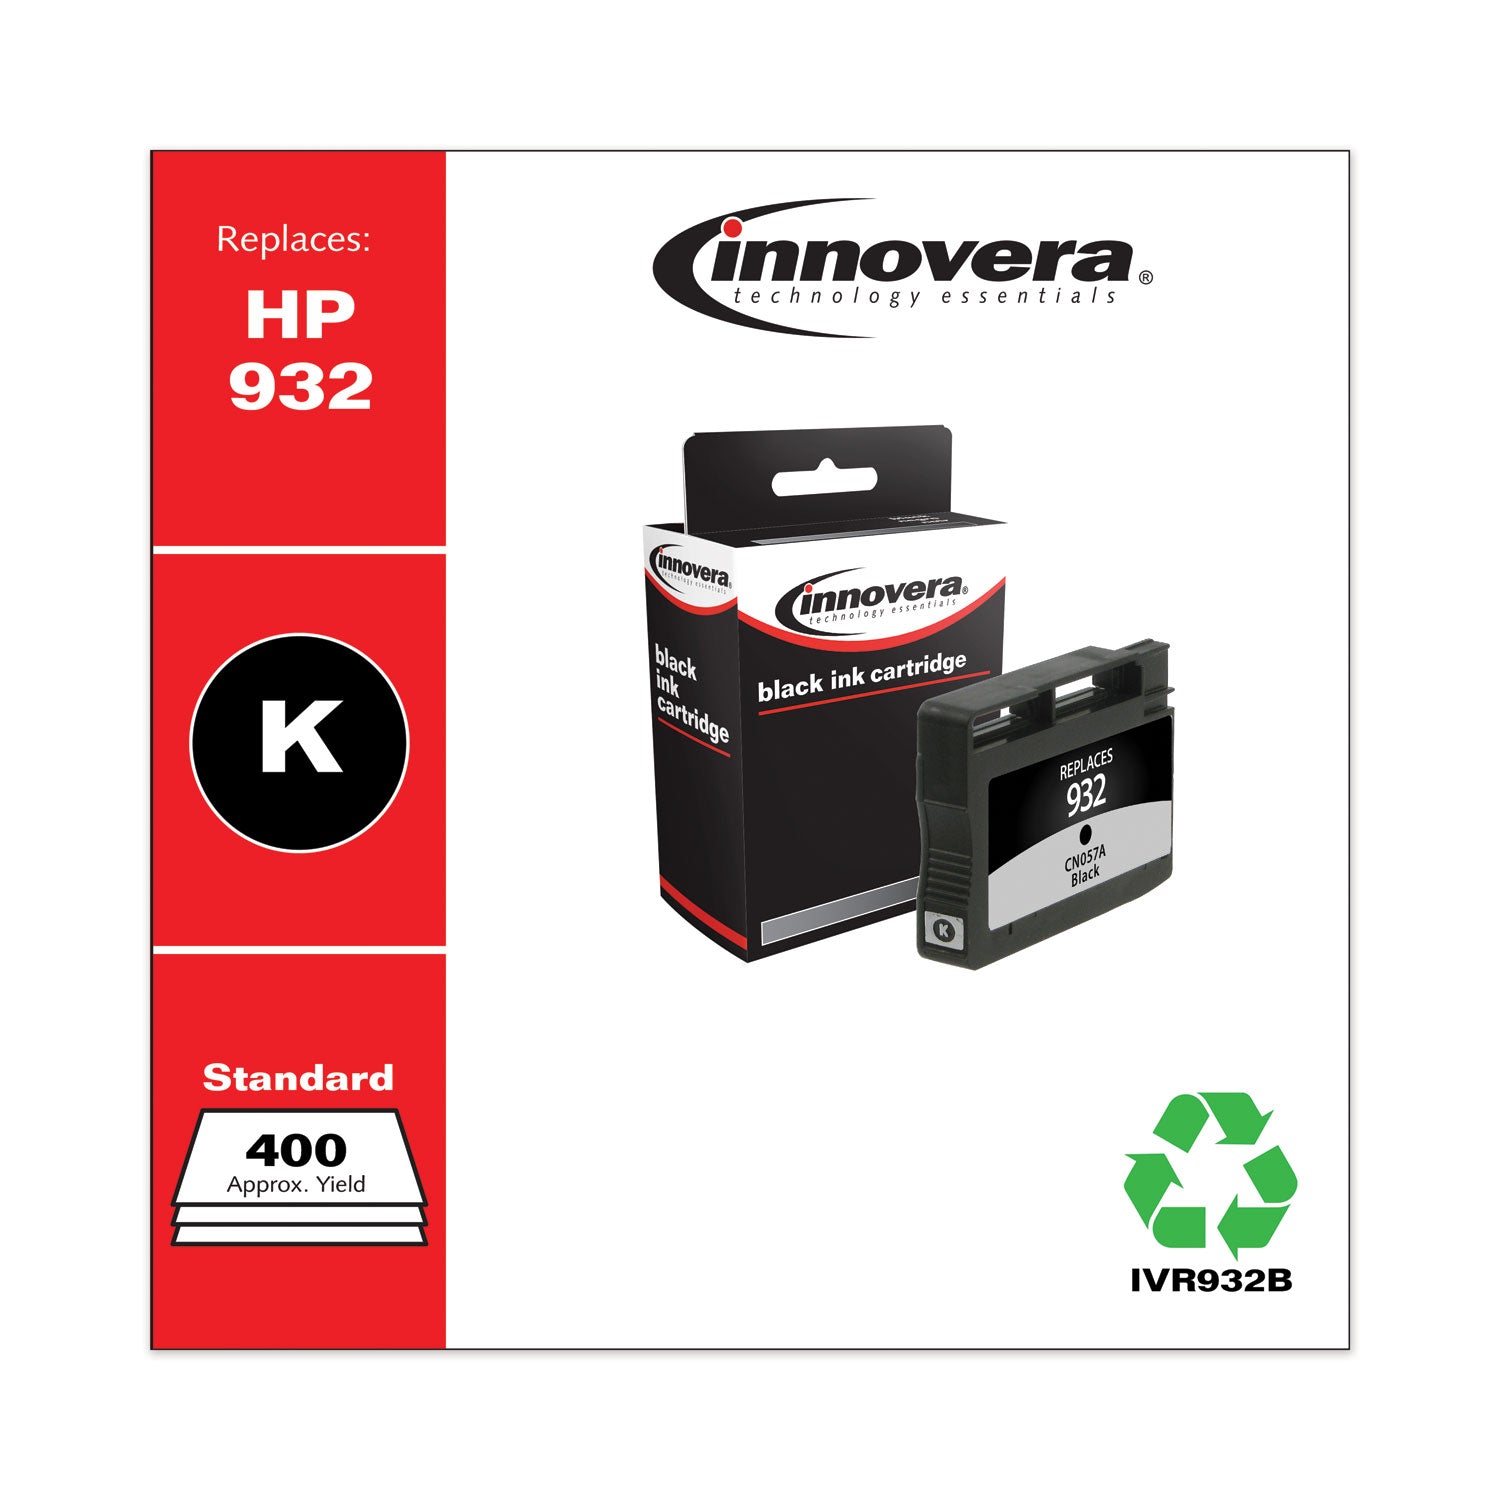 remanufactured-black-ink-replacement-for-932-cn057a-400-page-yield_ivr932b - 2